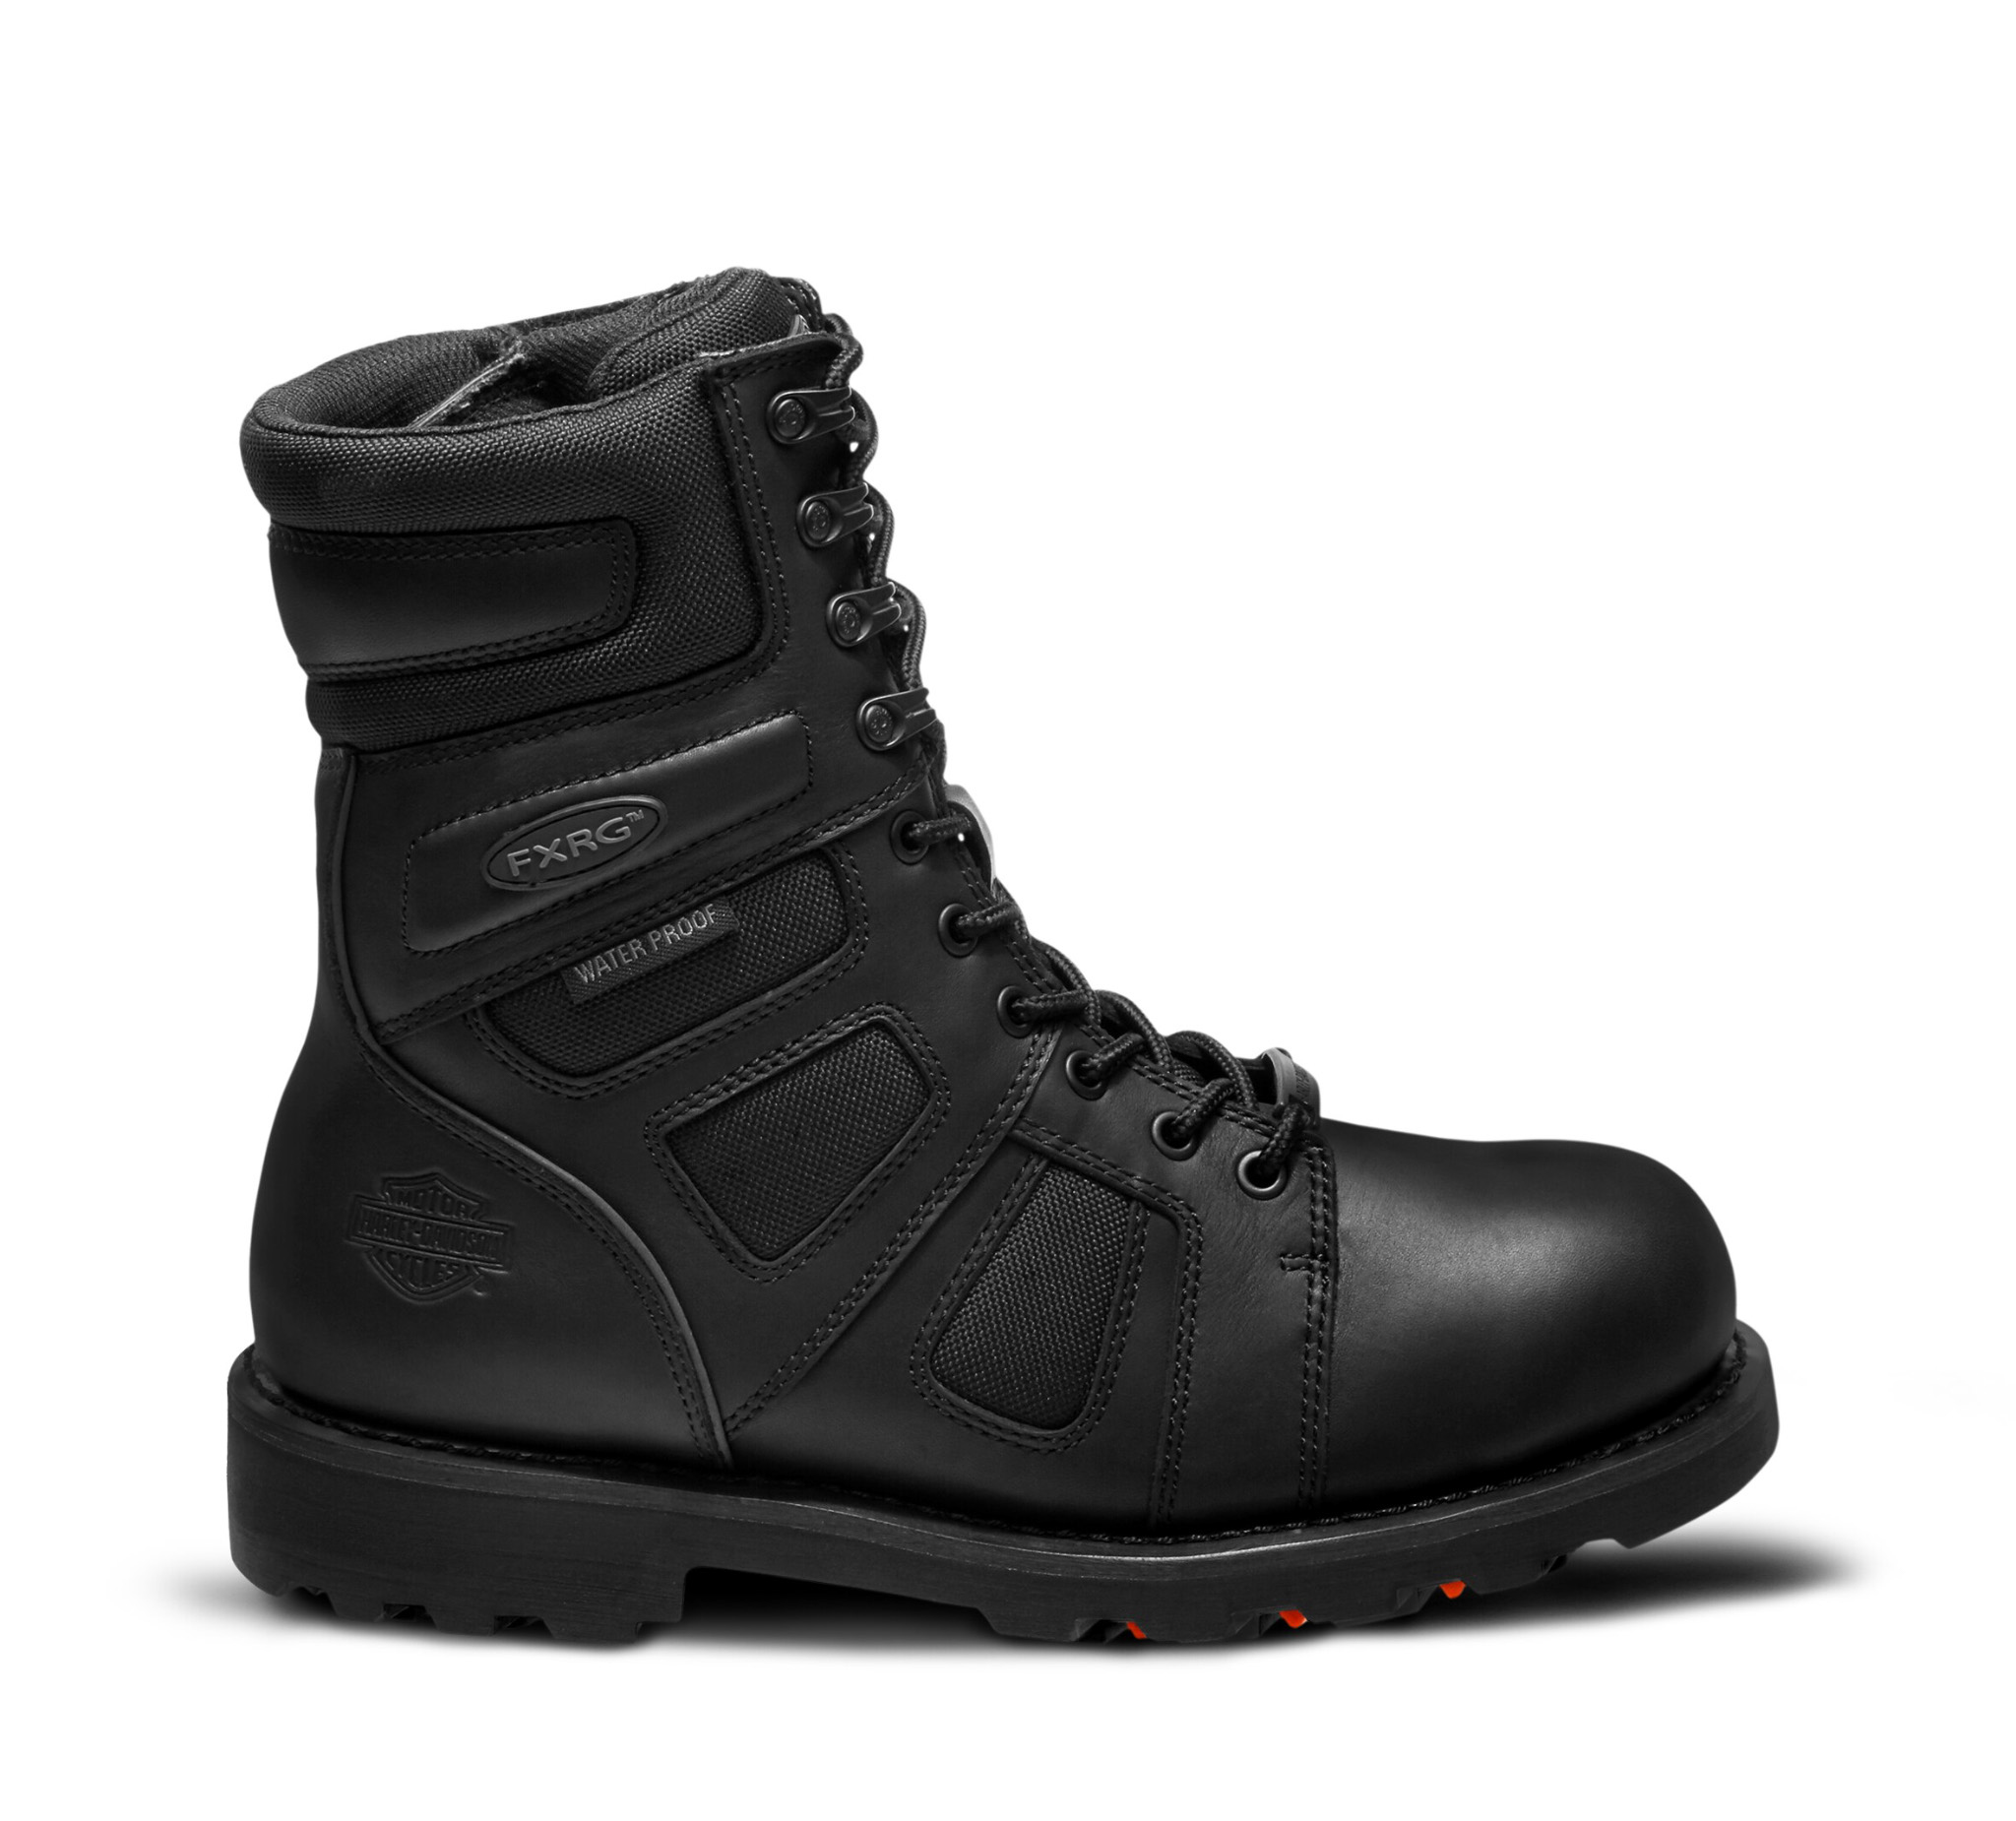 Men's Welton Leather Waterproof FXRG Riding Boots